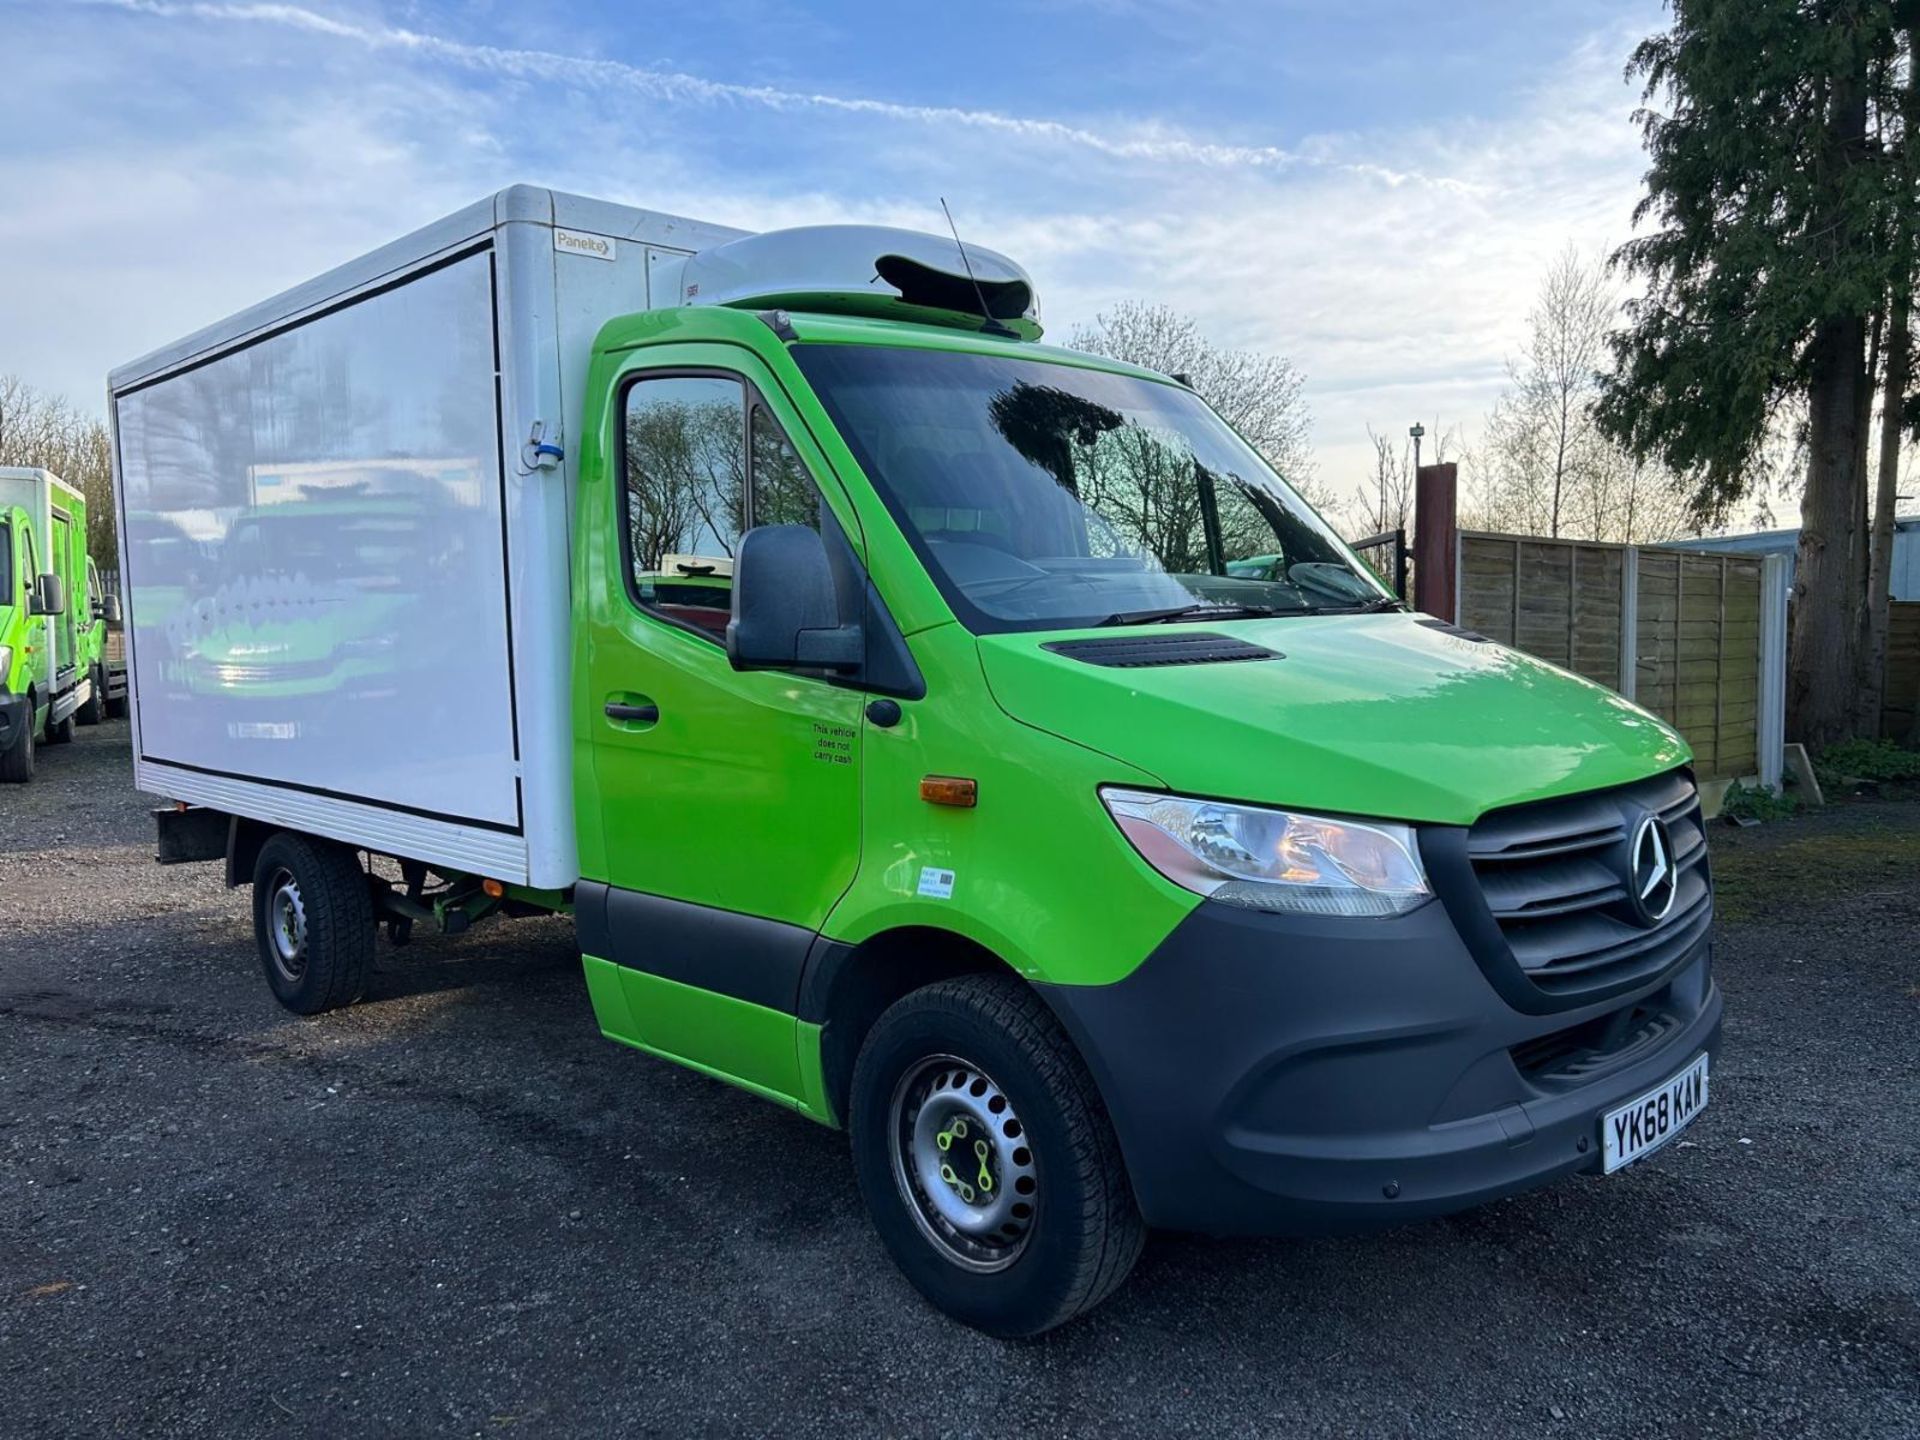 >>>SPECIAL CLEARANCE<<< 2019 MERCEDES-BENZ SPRINTER 314 CDI: RELIABLE WORKHORSE